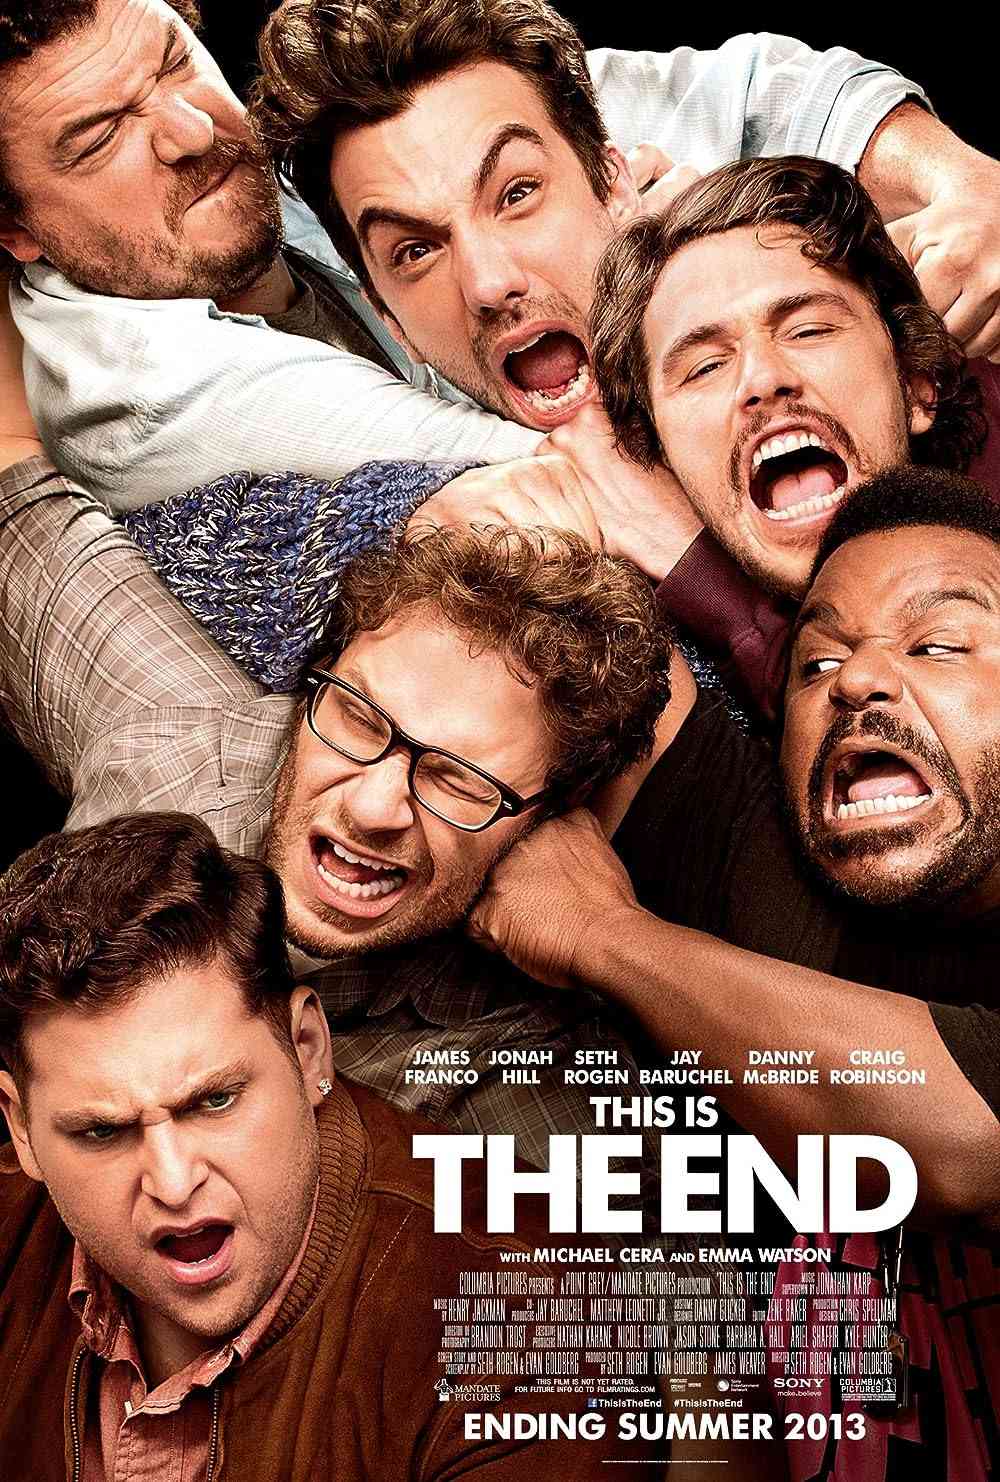 FULL MOVIE: This Is The End (2013)